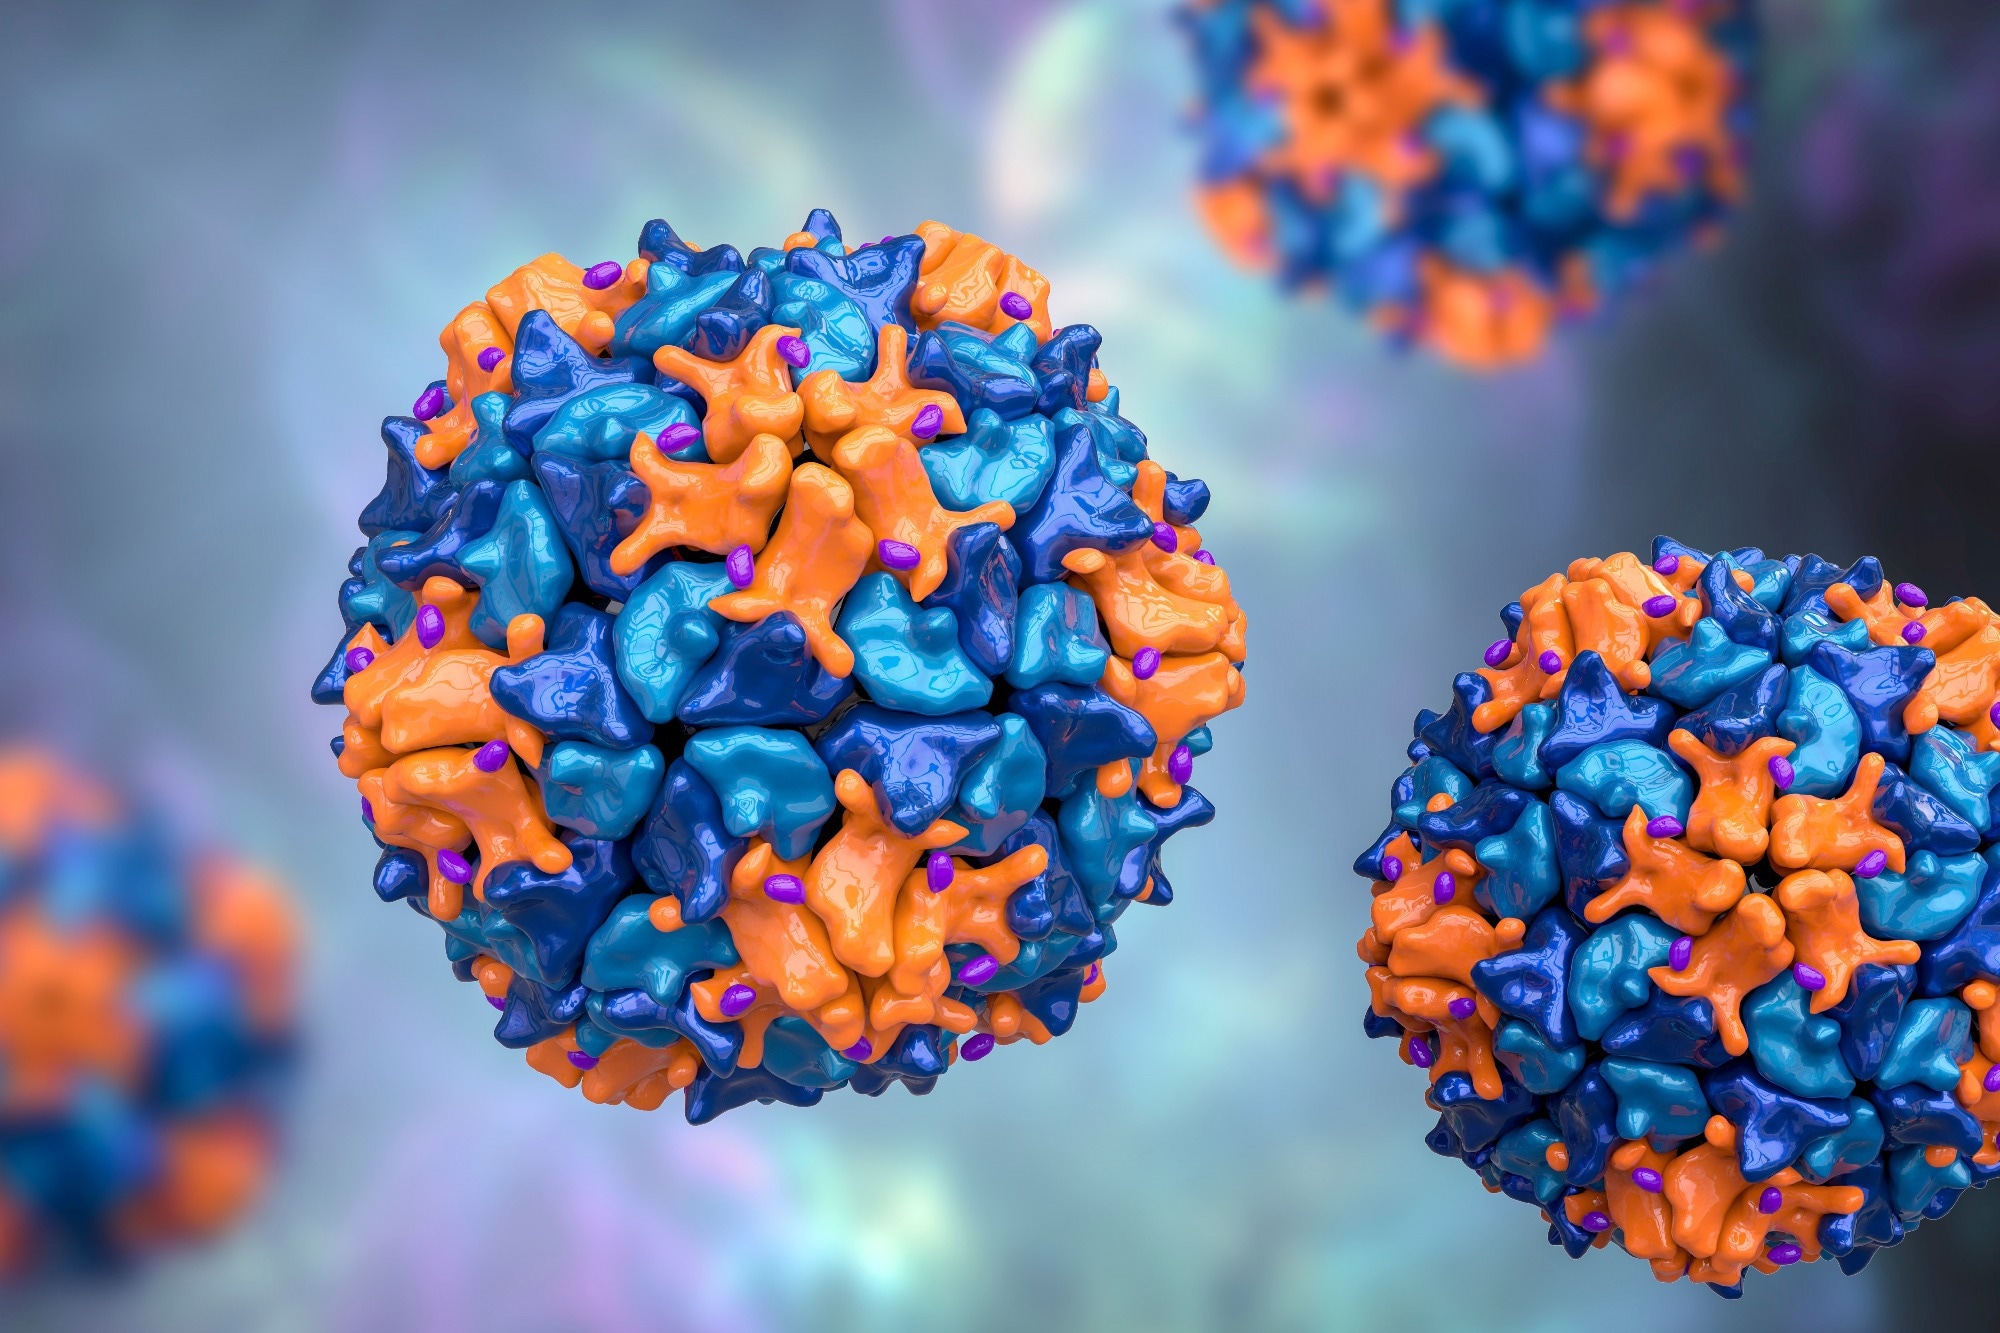 Rapid communication: Emergence of genetically linked vaccine-originated poliovirus type 2 in the absence of oral polio vaccine, Jerusalem, April to July 2022. Image Credit: Kateryna Kon / Shutterstock